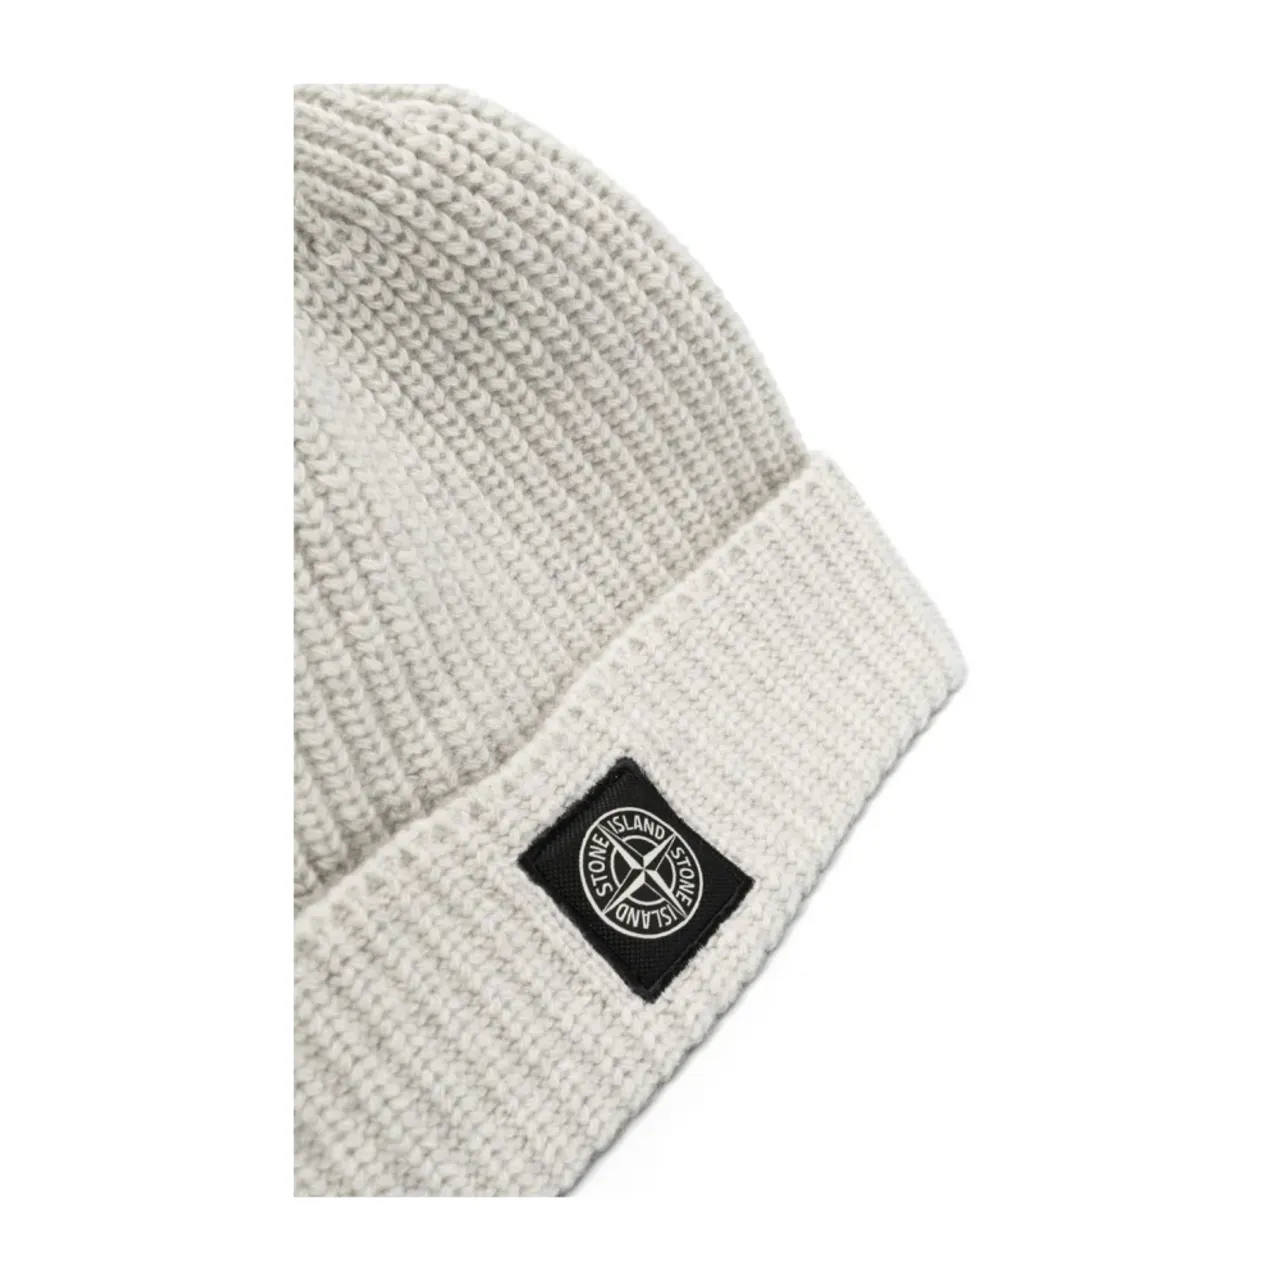 Stone Island , Compass Ribbed-Knit Beanie in Light Grey ,Gray male, Sizes: ONE